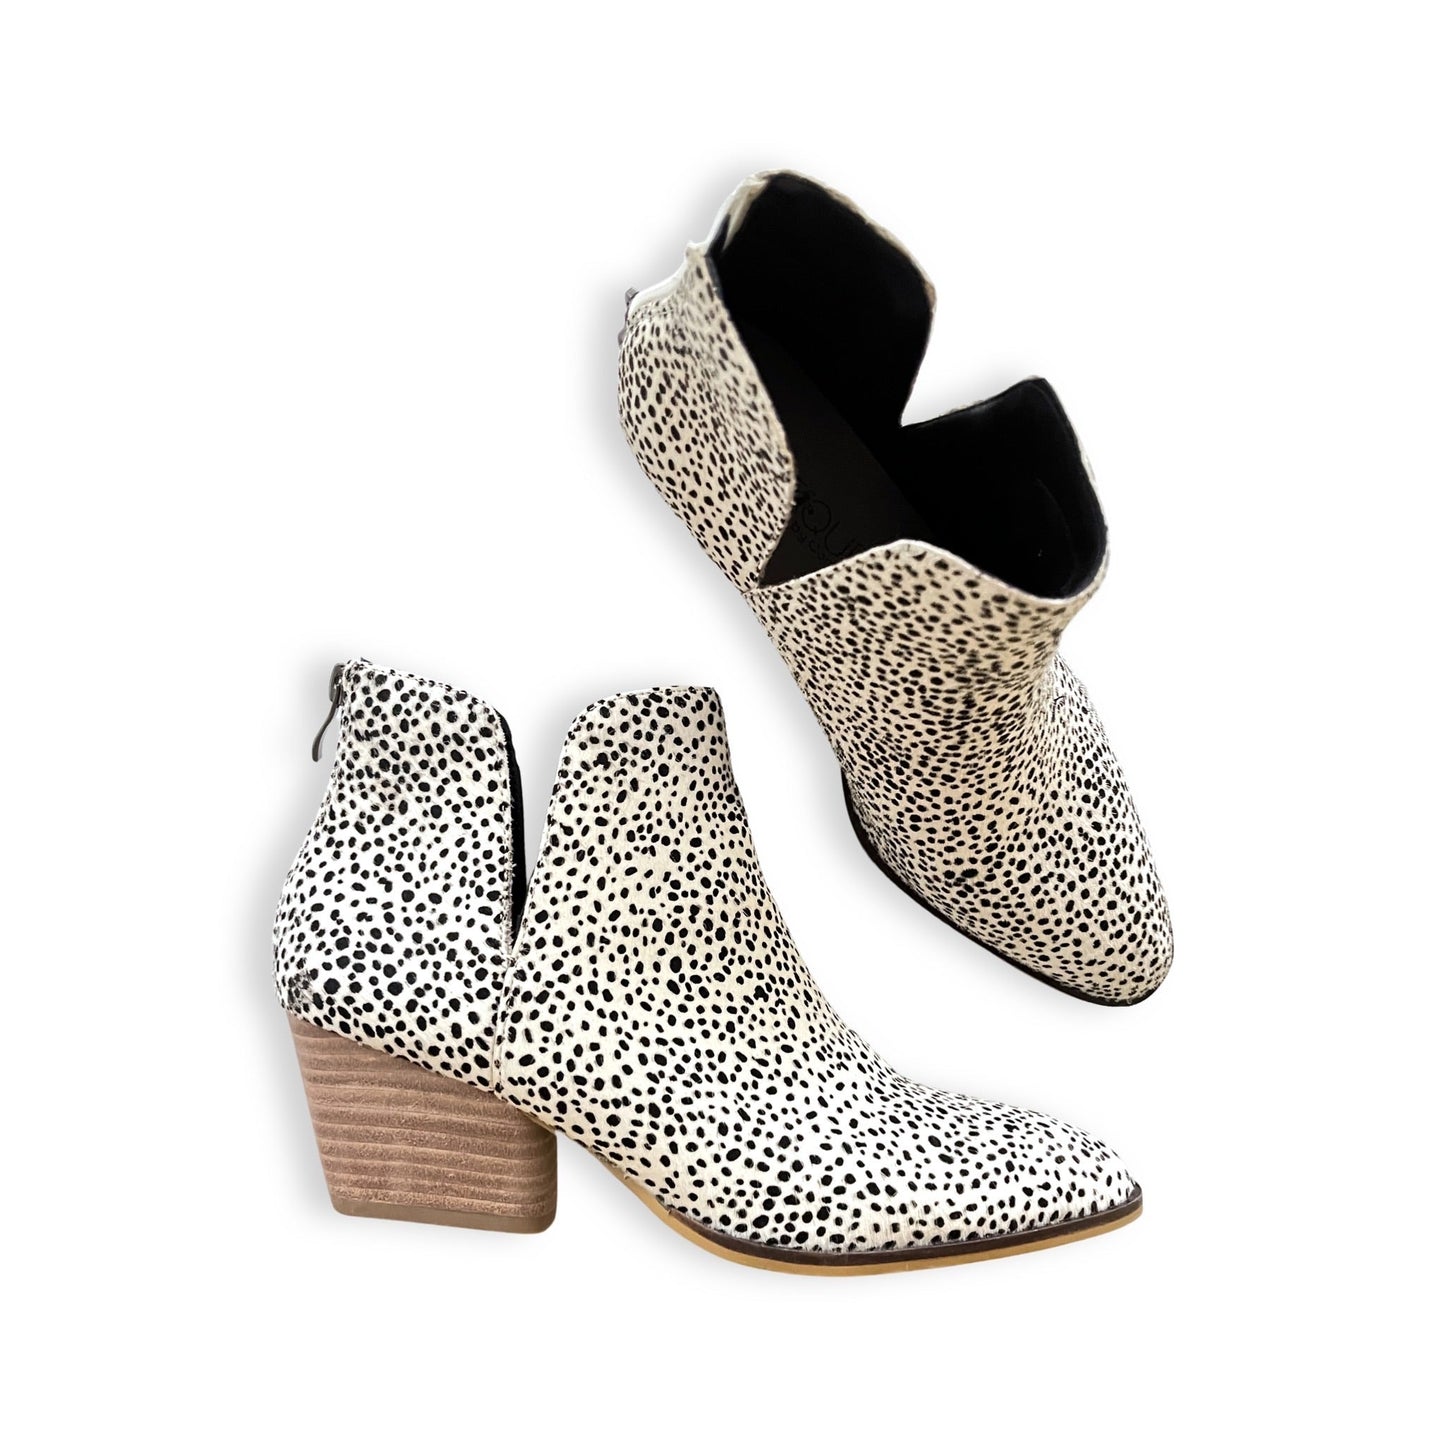 Bessie White Speckled Ankle Boots